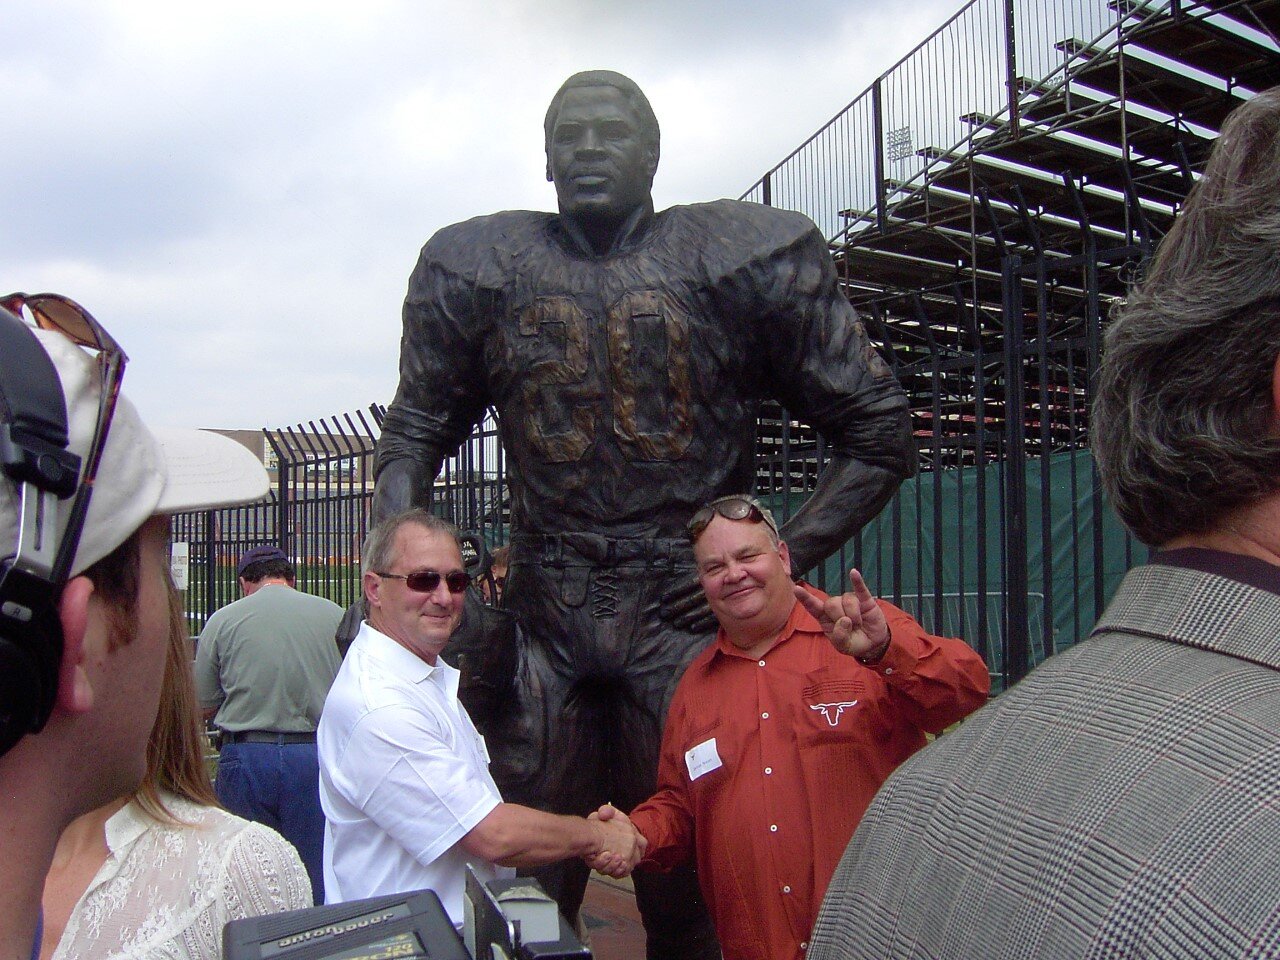  Jimmy Nixon is the visionary and fundraiser who created the Earl Campbell bronze. His newest project is the creation of bronze busts of the 4 Longhorn National Championship quarterbacks. In photo, Jimmy is on the right and sculptor Ken Bjorge is on 